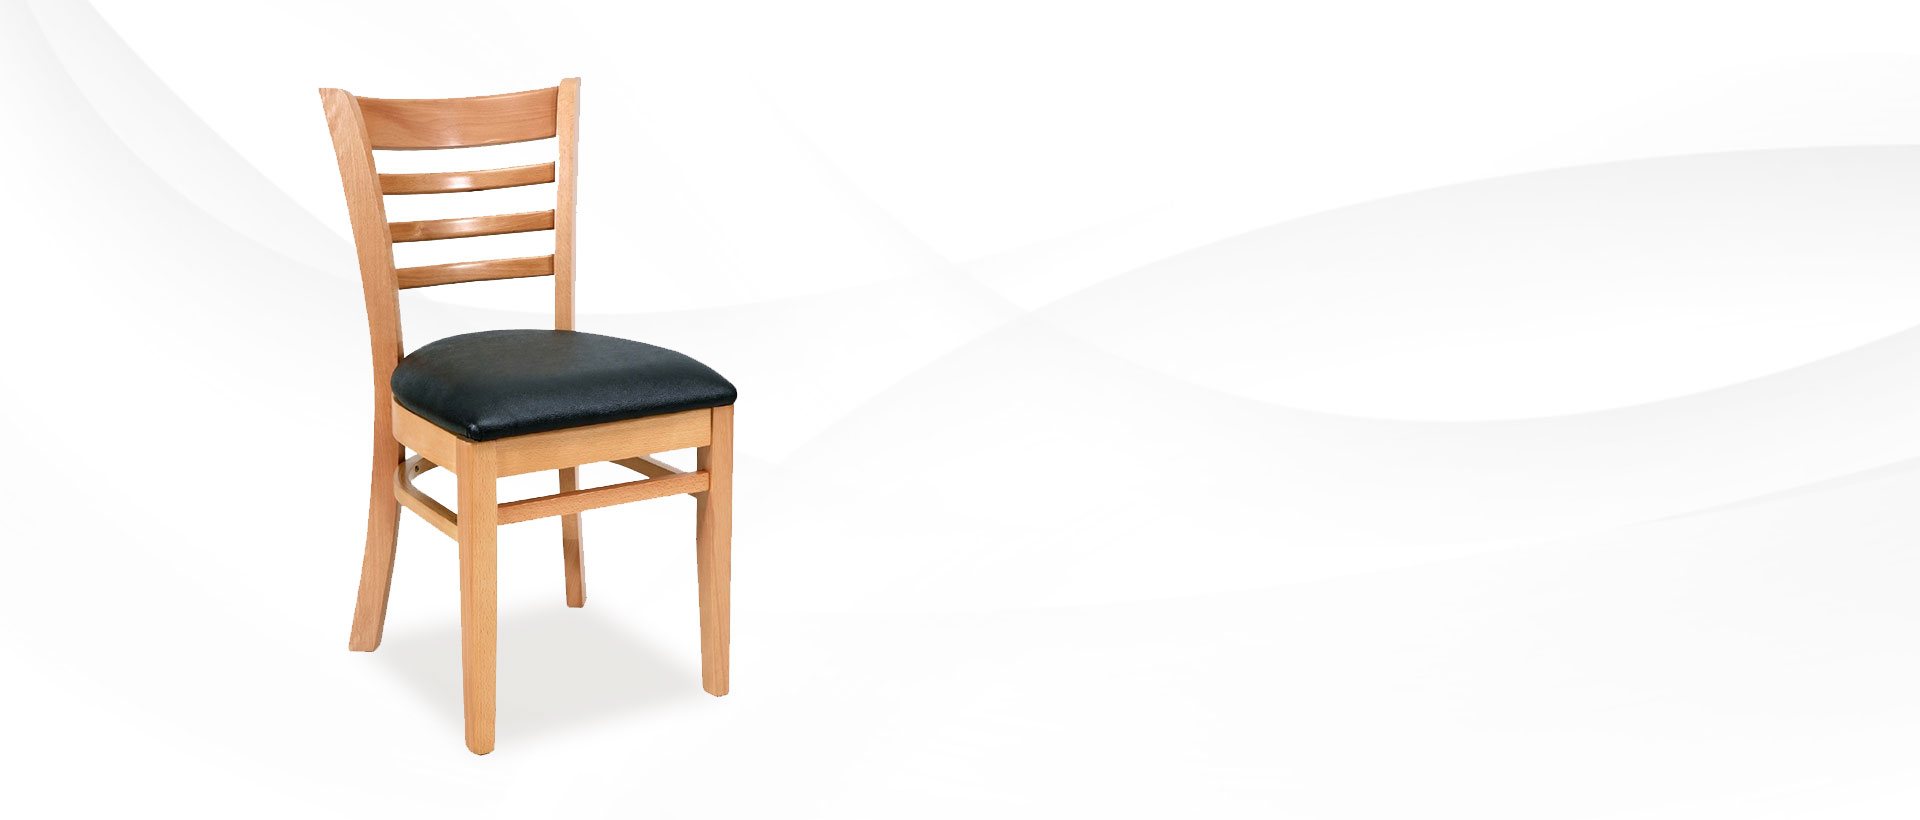 Wooden Dining Chair Supplier